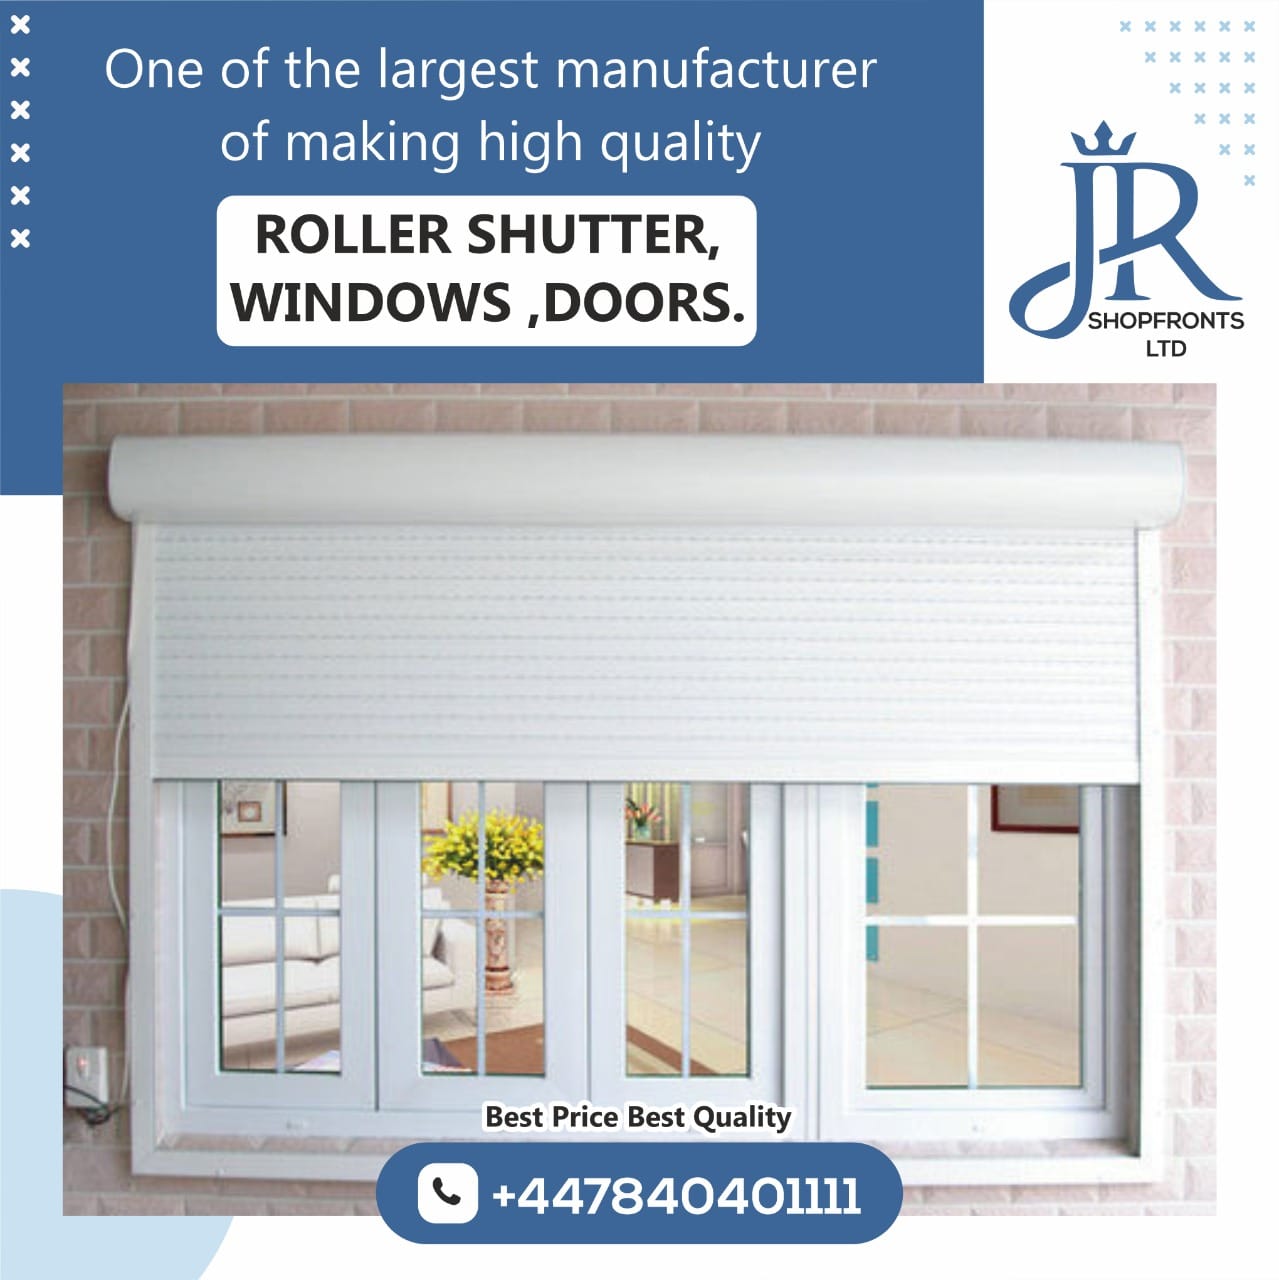 Shutter Company In Oban, shutter complany in Oban, doors manufactuers in Oban, shutters manufacturers in Oban, roller shutters manufacturers in Oban, doors manufacturers in Oban, Shutter Company In Oban